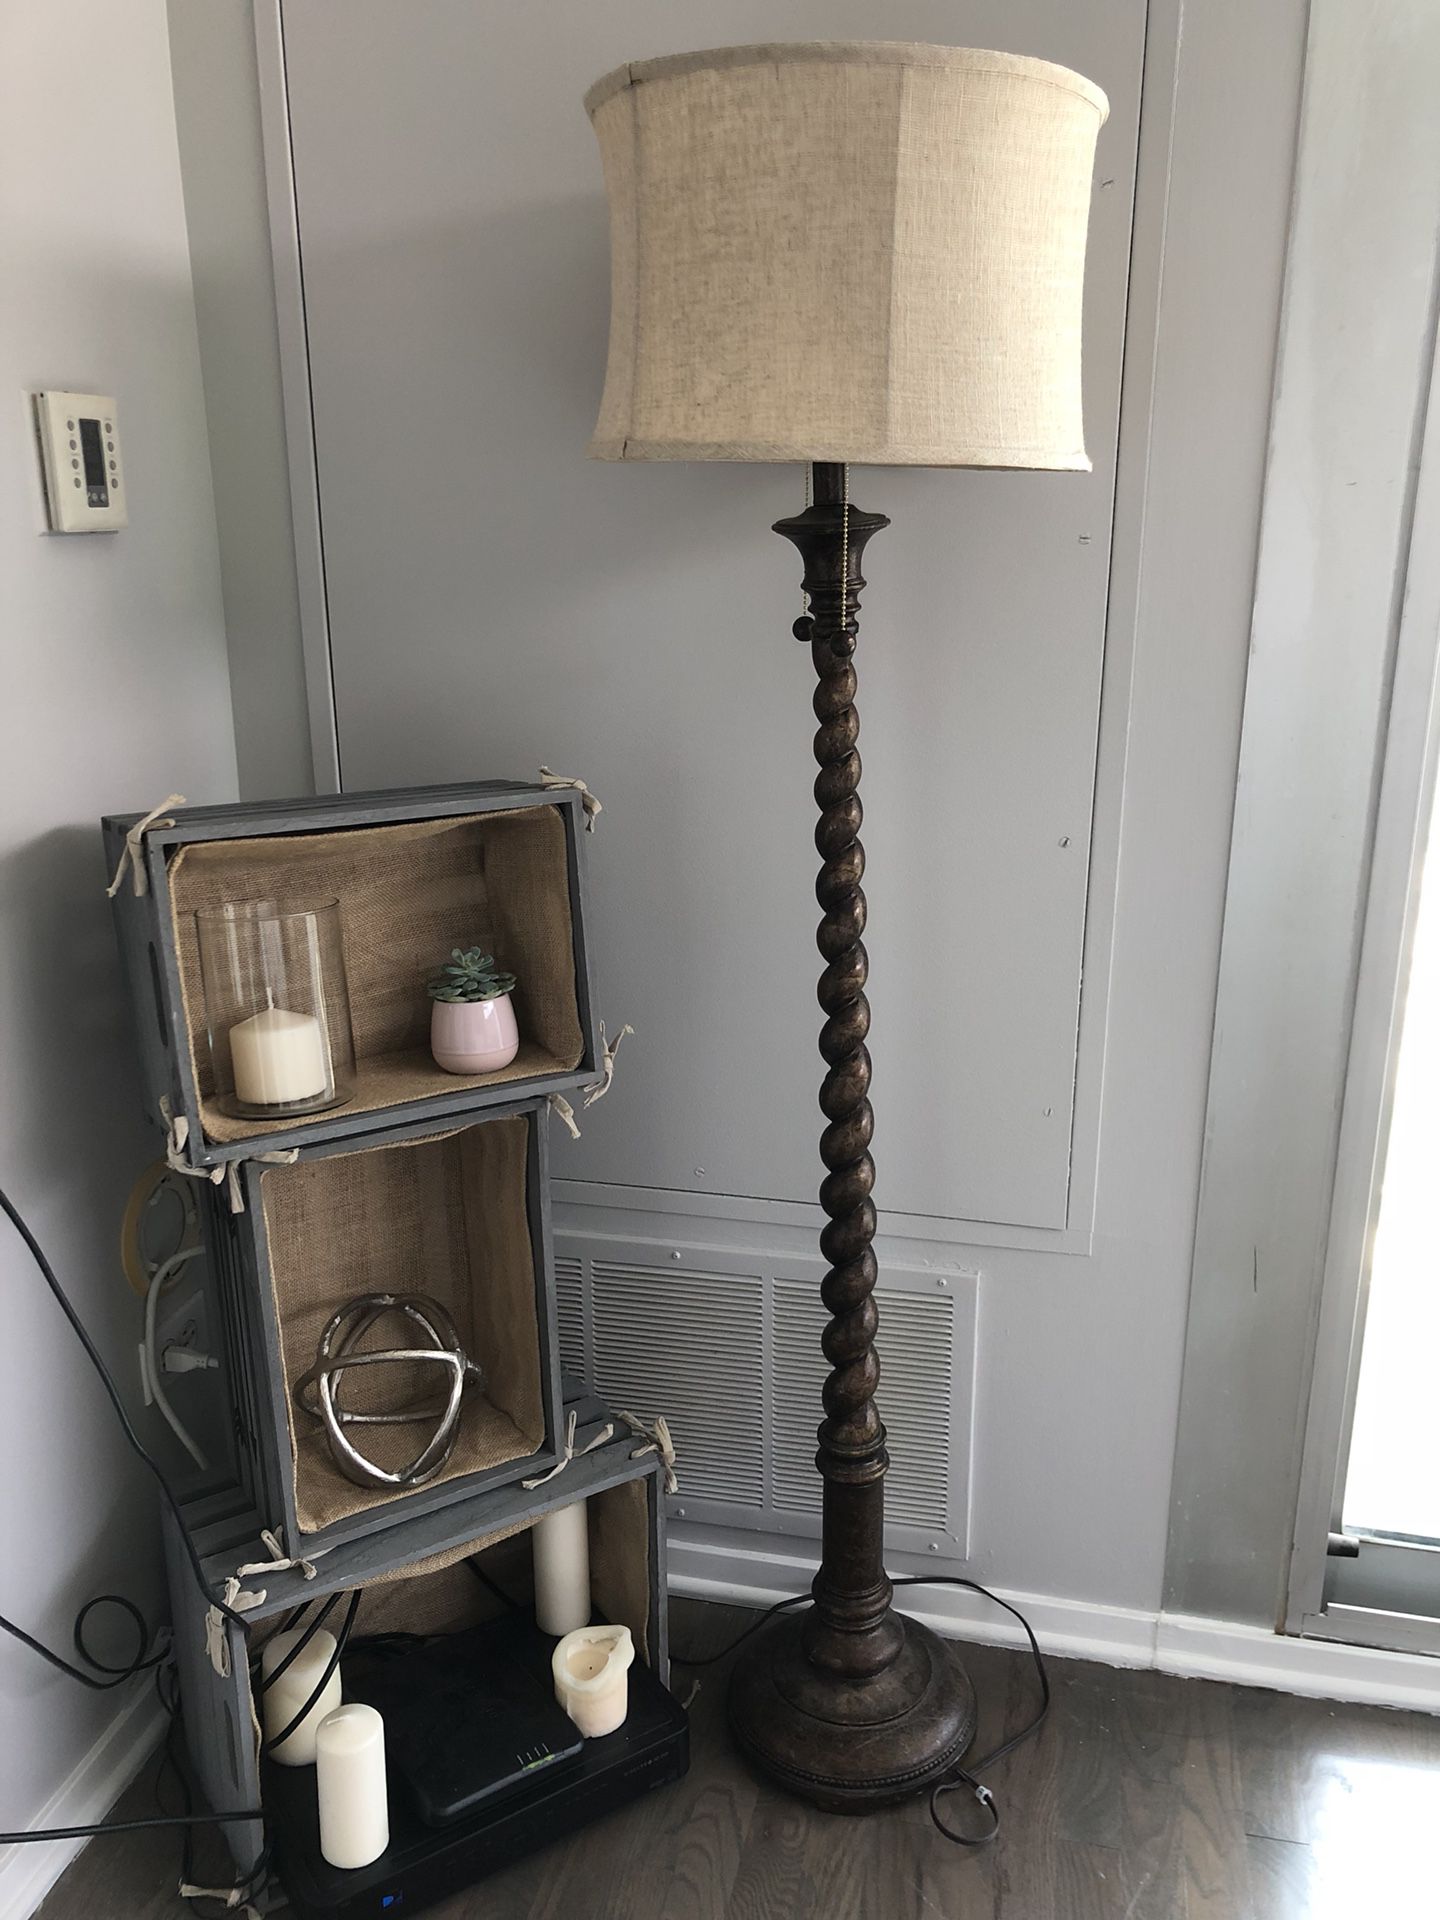 Decorative floor lamp from Home Goods. Brand new, great condition. Purchased from Home Goods for $150